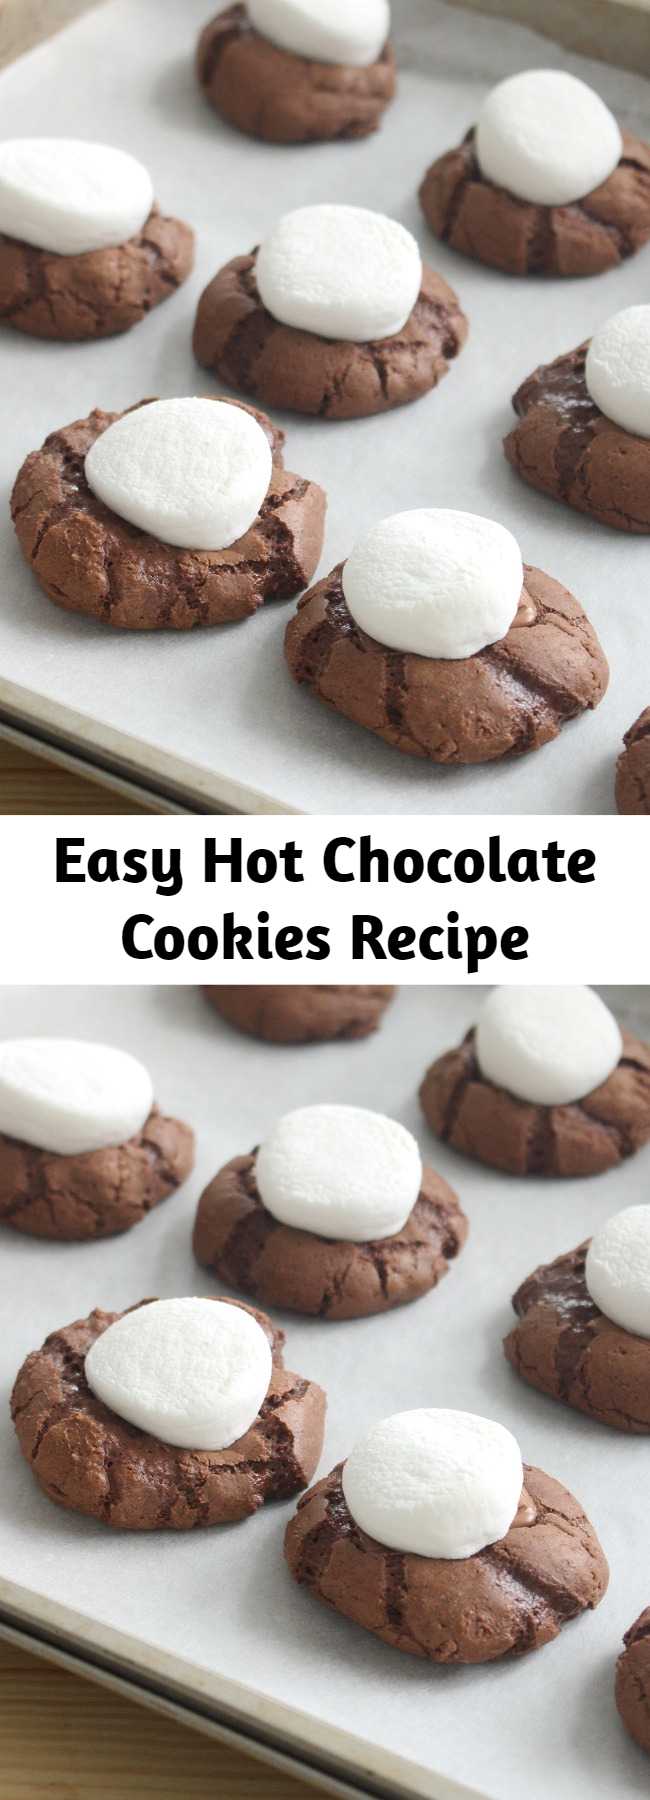 Easy Hot Chocolate Cookies Recipe - Curl up by the fire with a warm blanket and these easy and delicious chocolatey, marshmallow cookies.